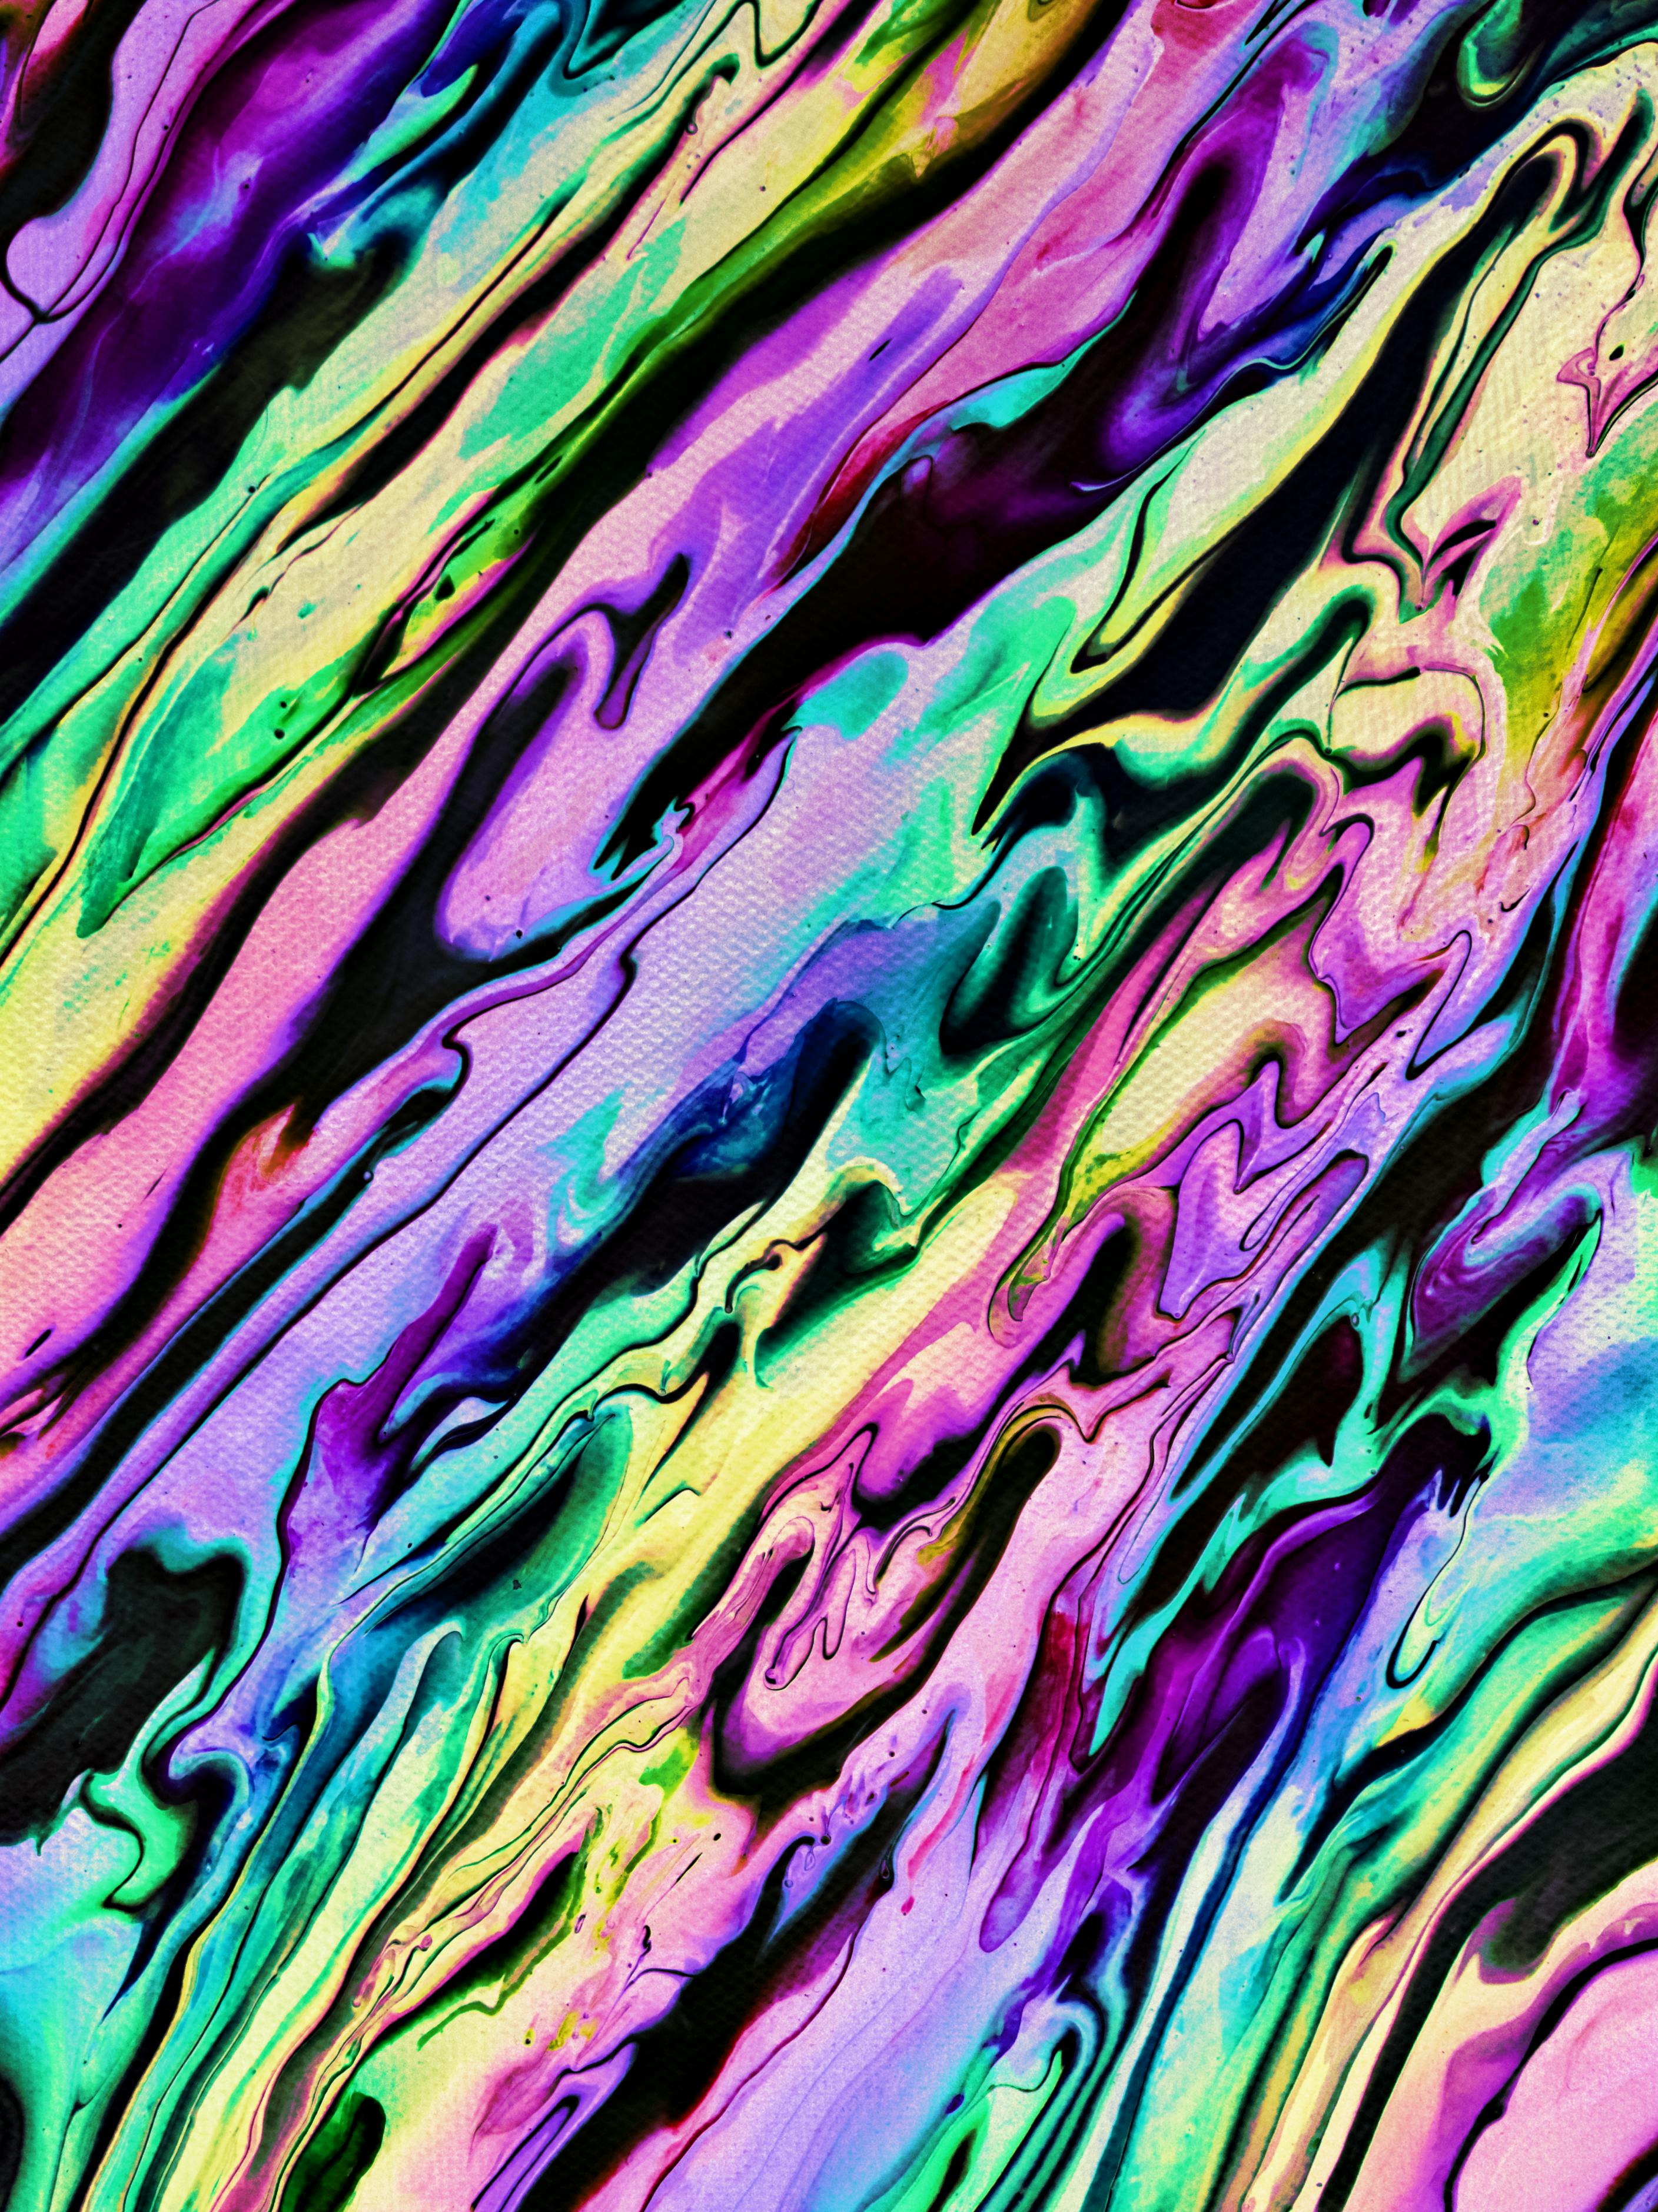 450+ Artistic Psychedelic HD Wallpapers and Backgrounds